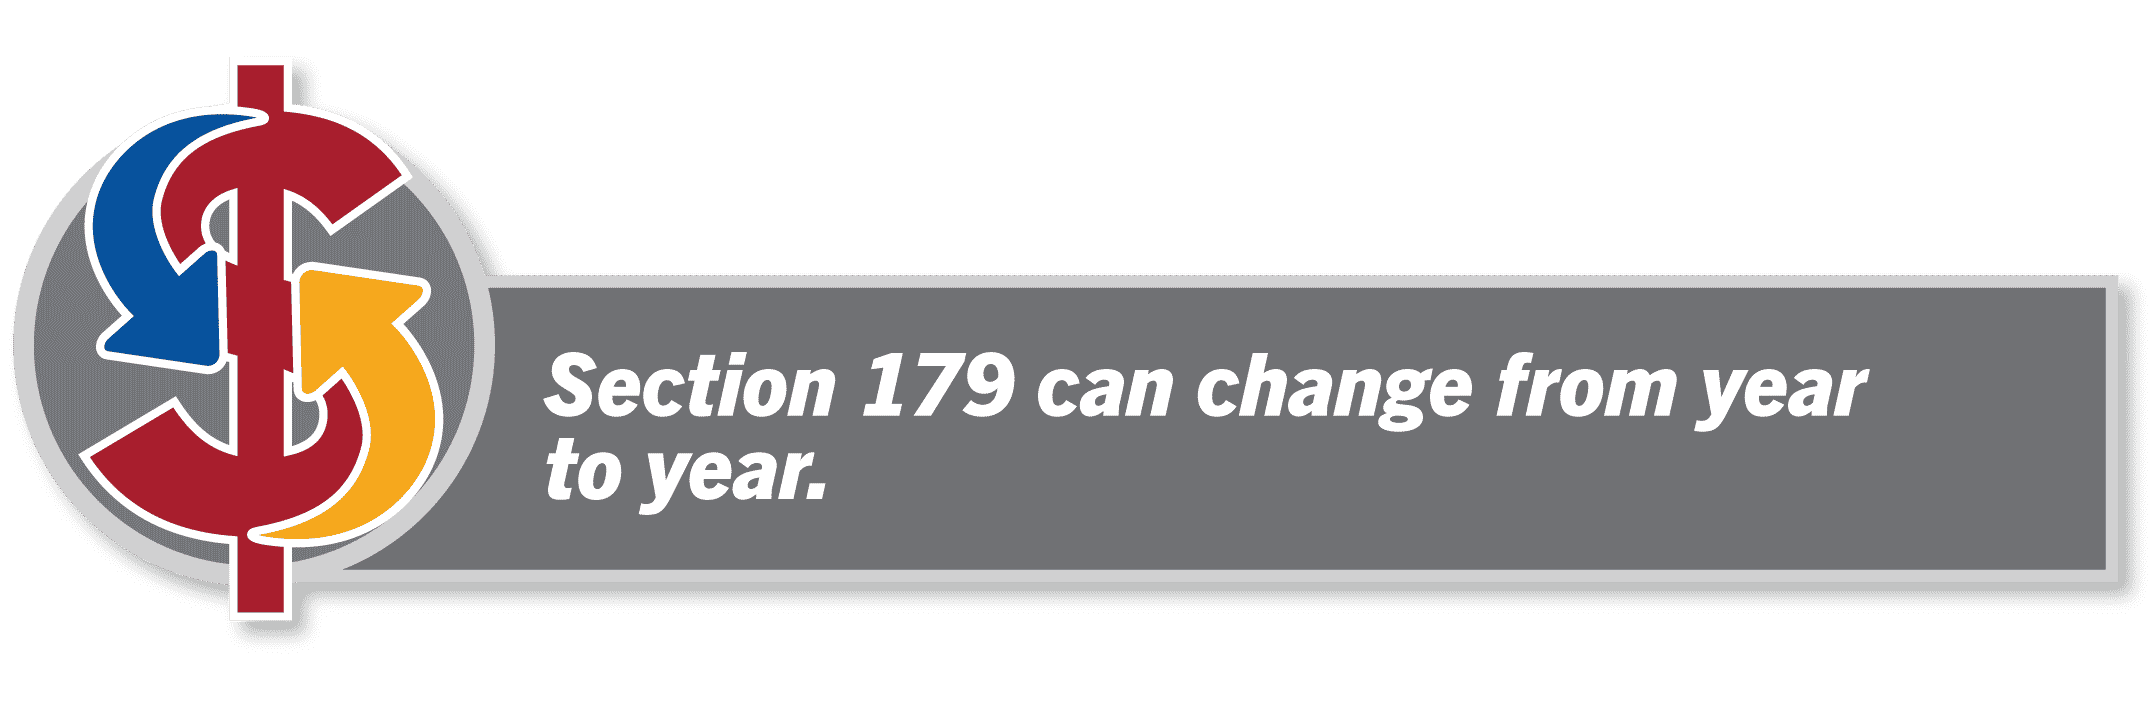 Section 179 - Change